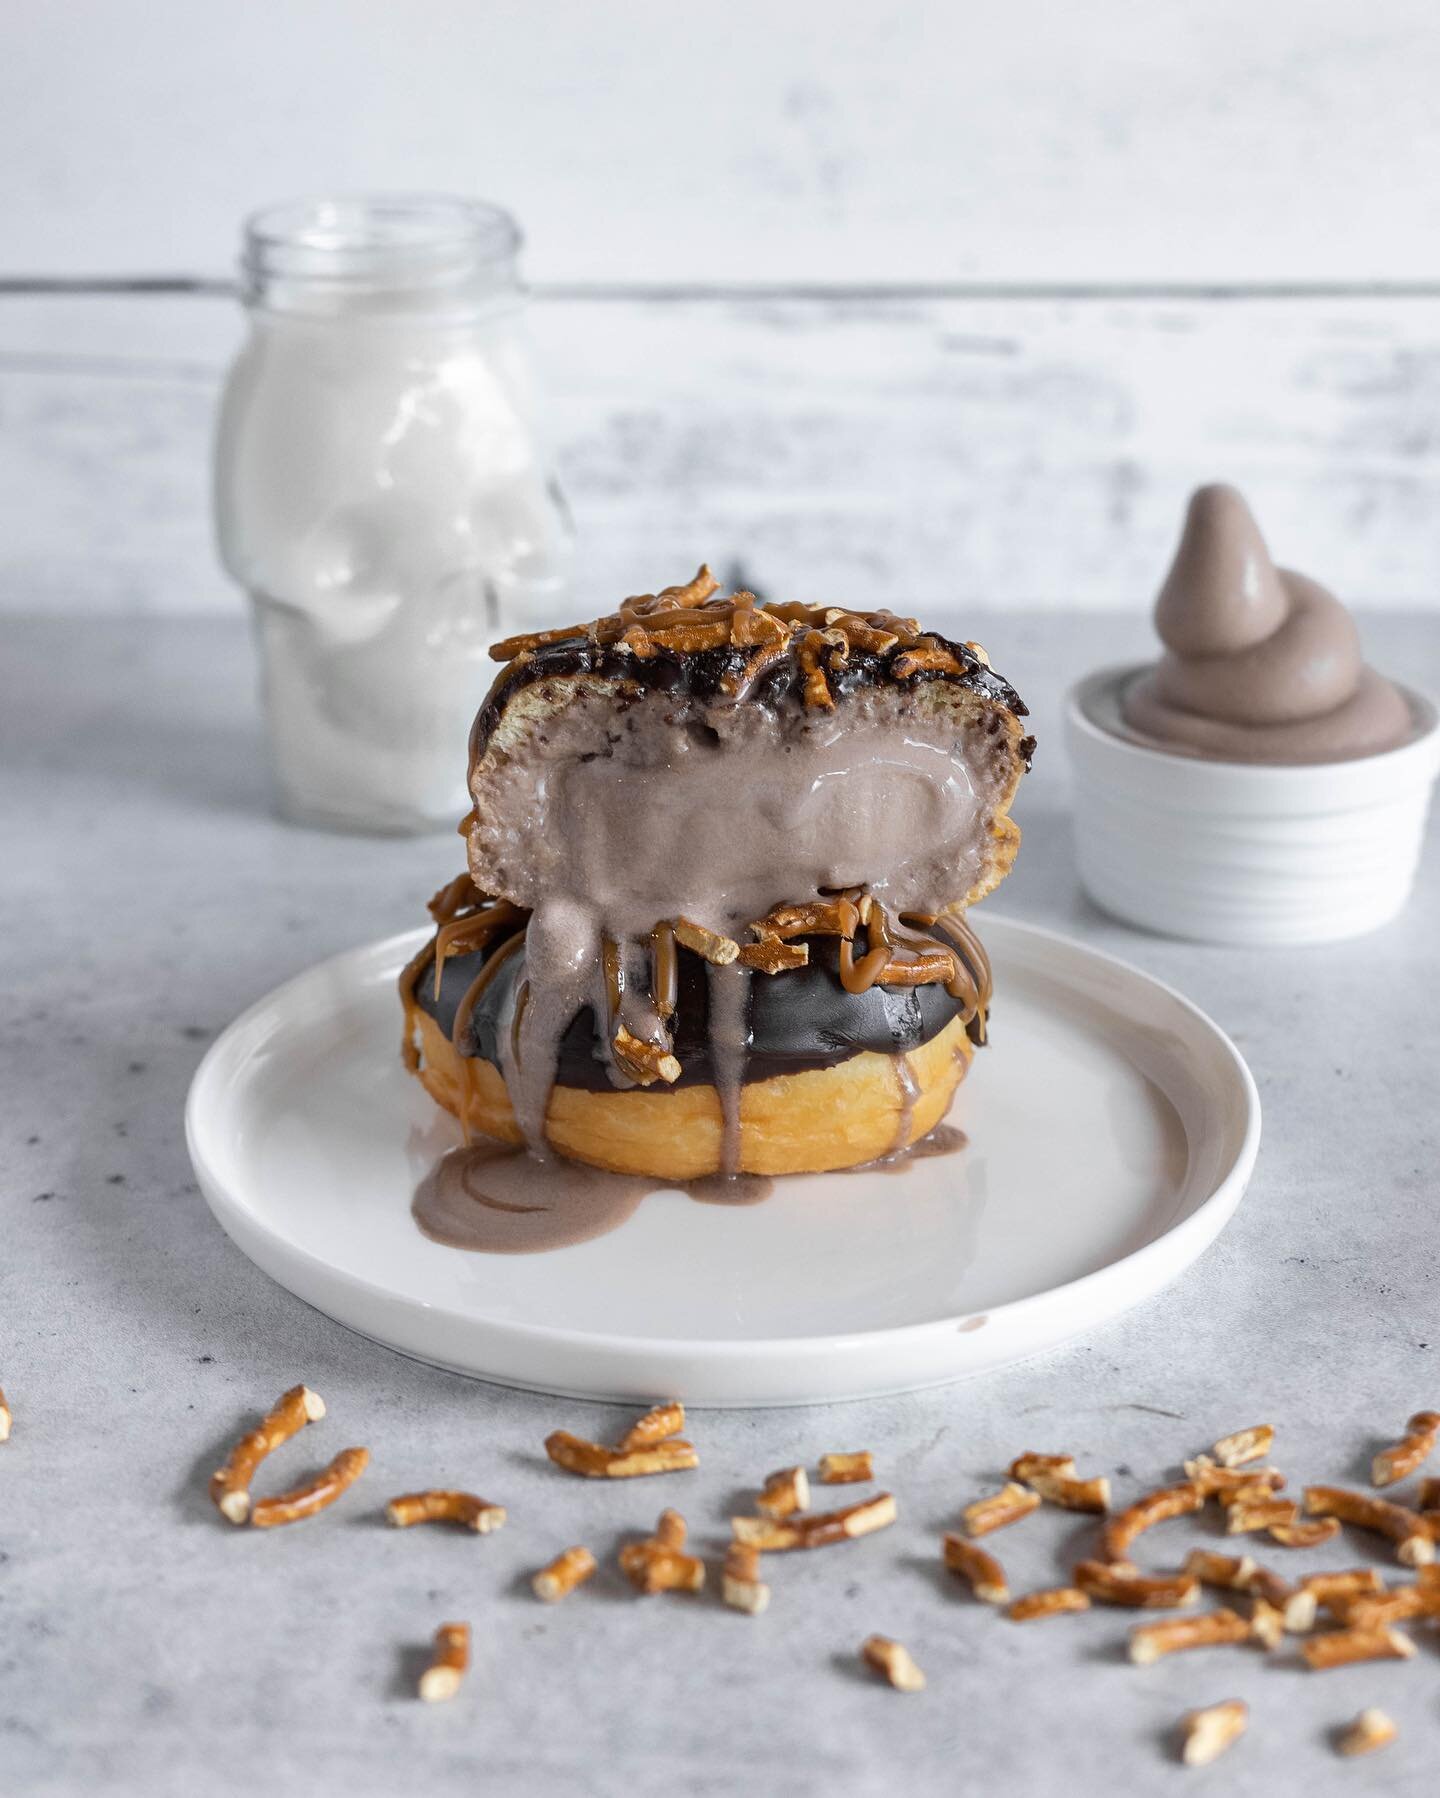 Our next ice cream injected donut: Chocolate Caramel Pretzel 🥨🍩🍦 (Not to be confused with out non-injected version which is available online) Ice cream donuts ONLY AVAILABLE in store!